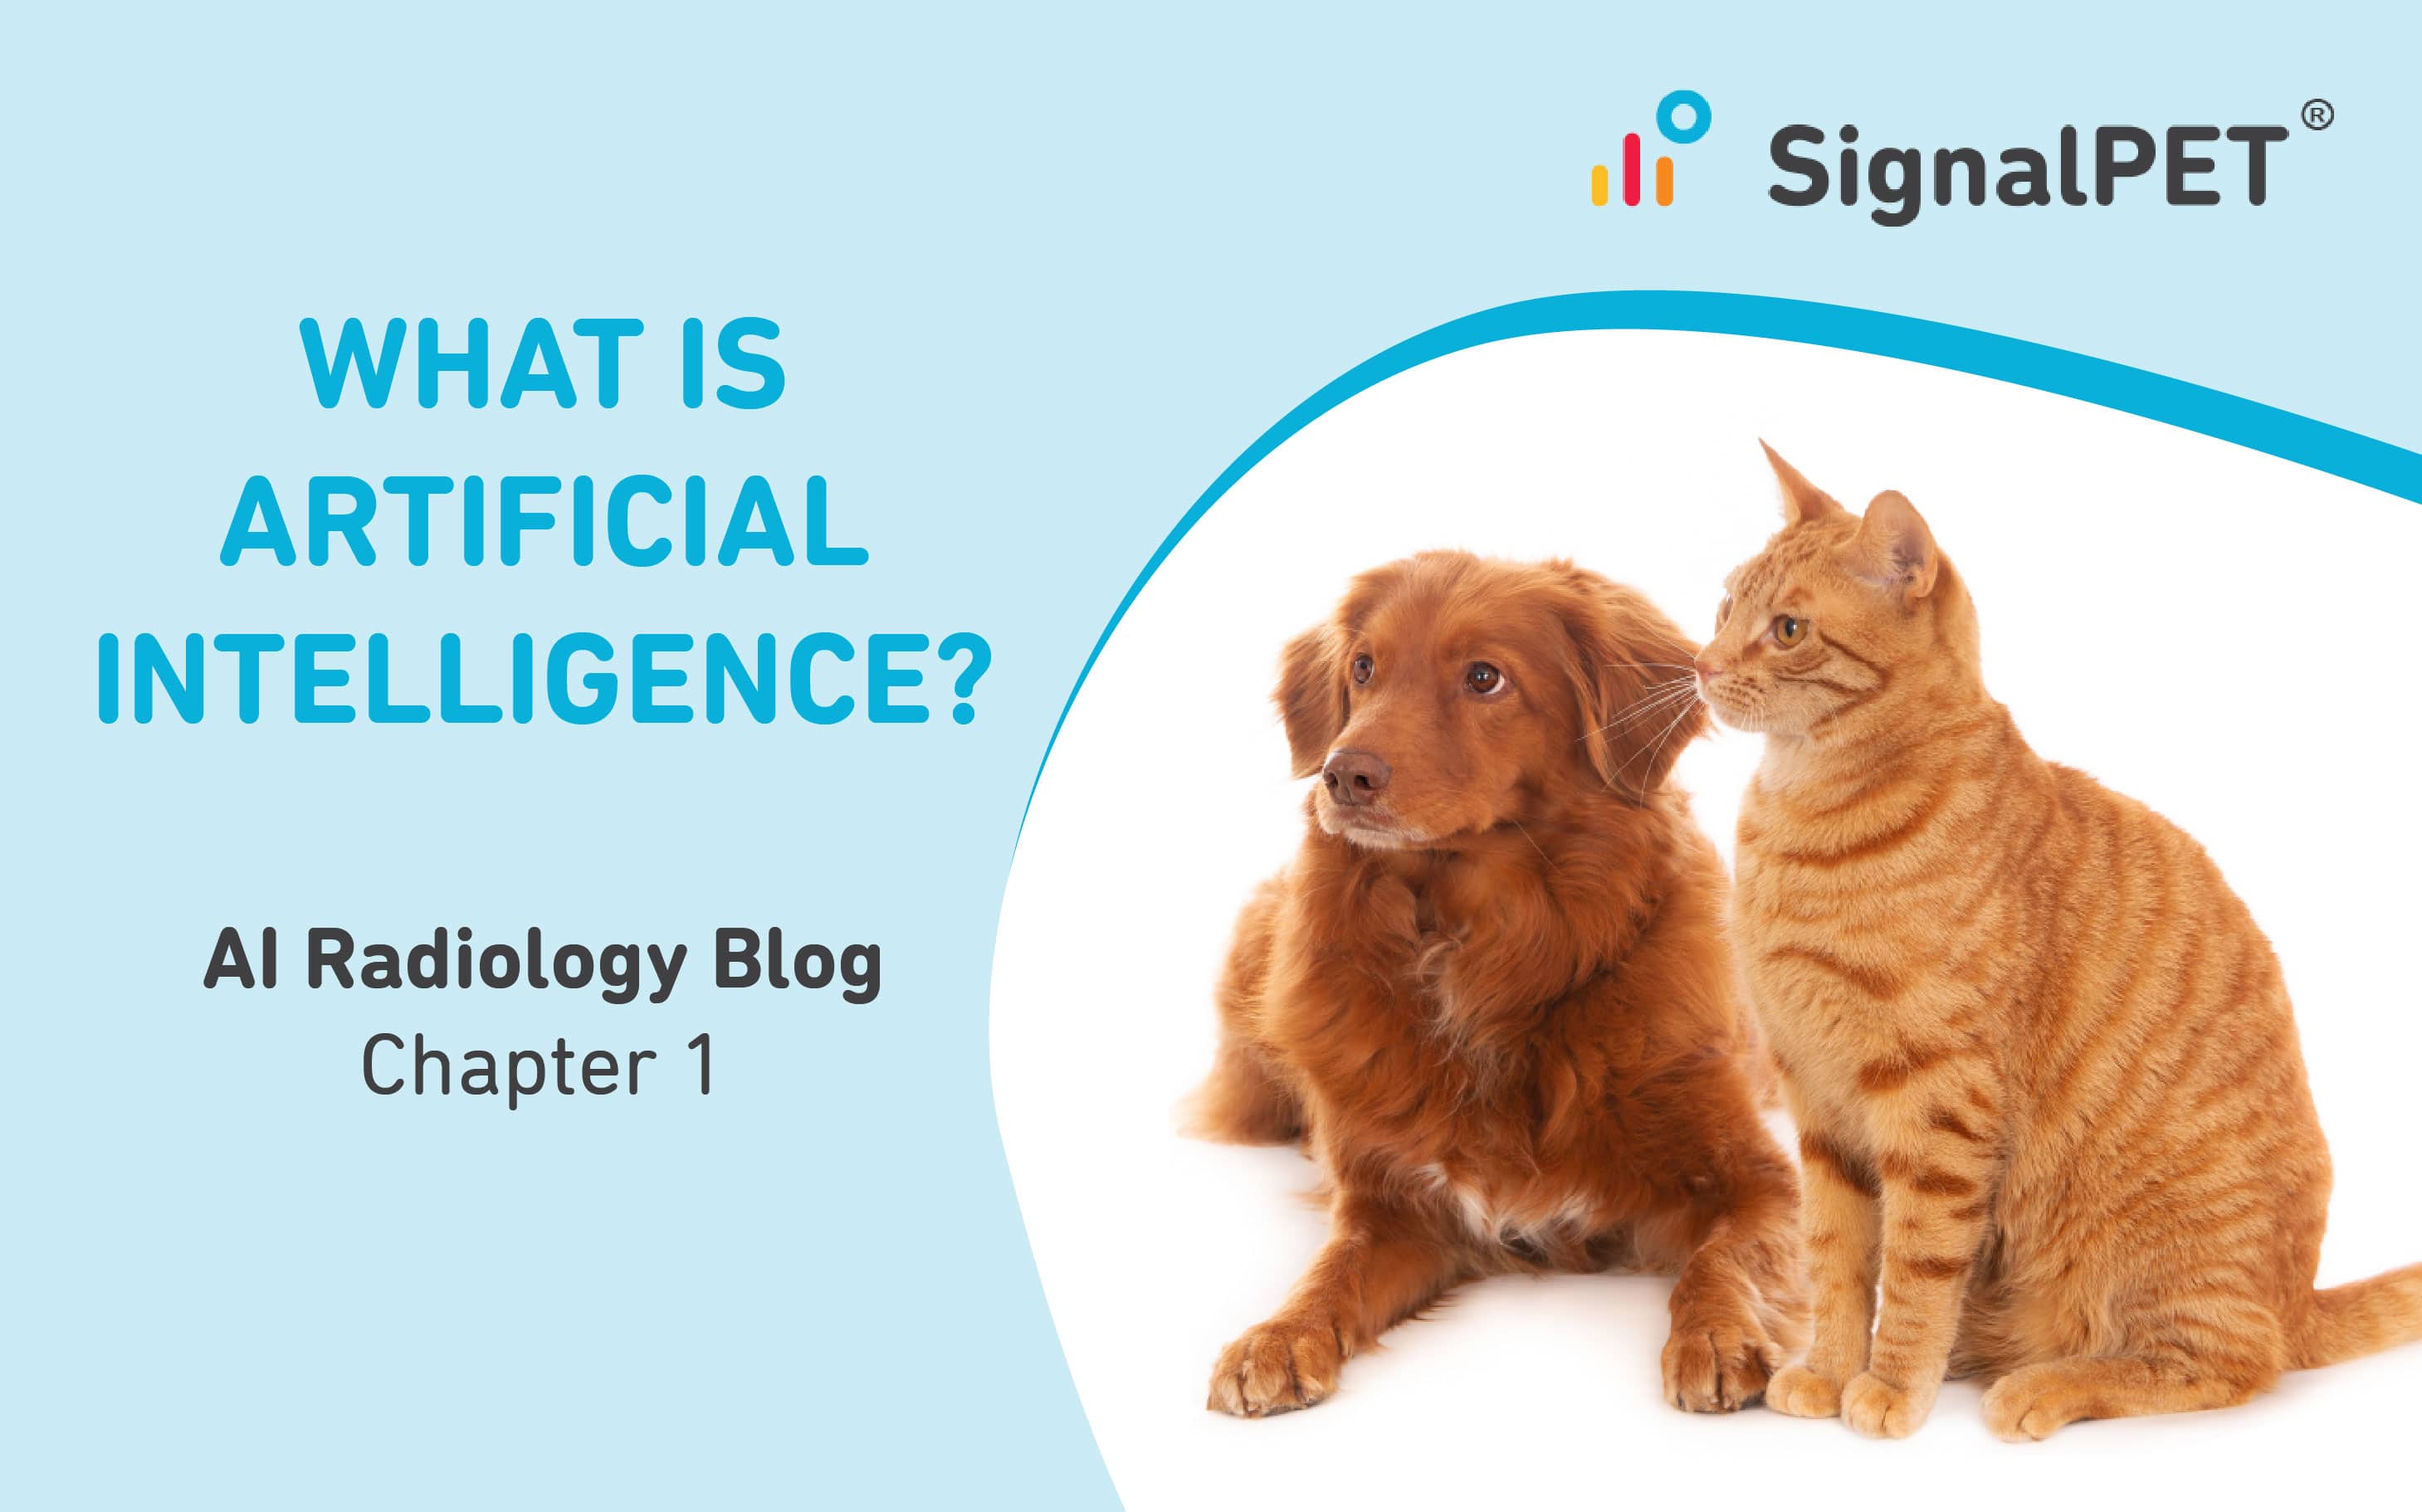 The AI Radiology Blog – Chapter 1: What is AI